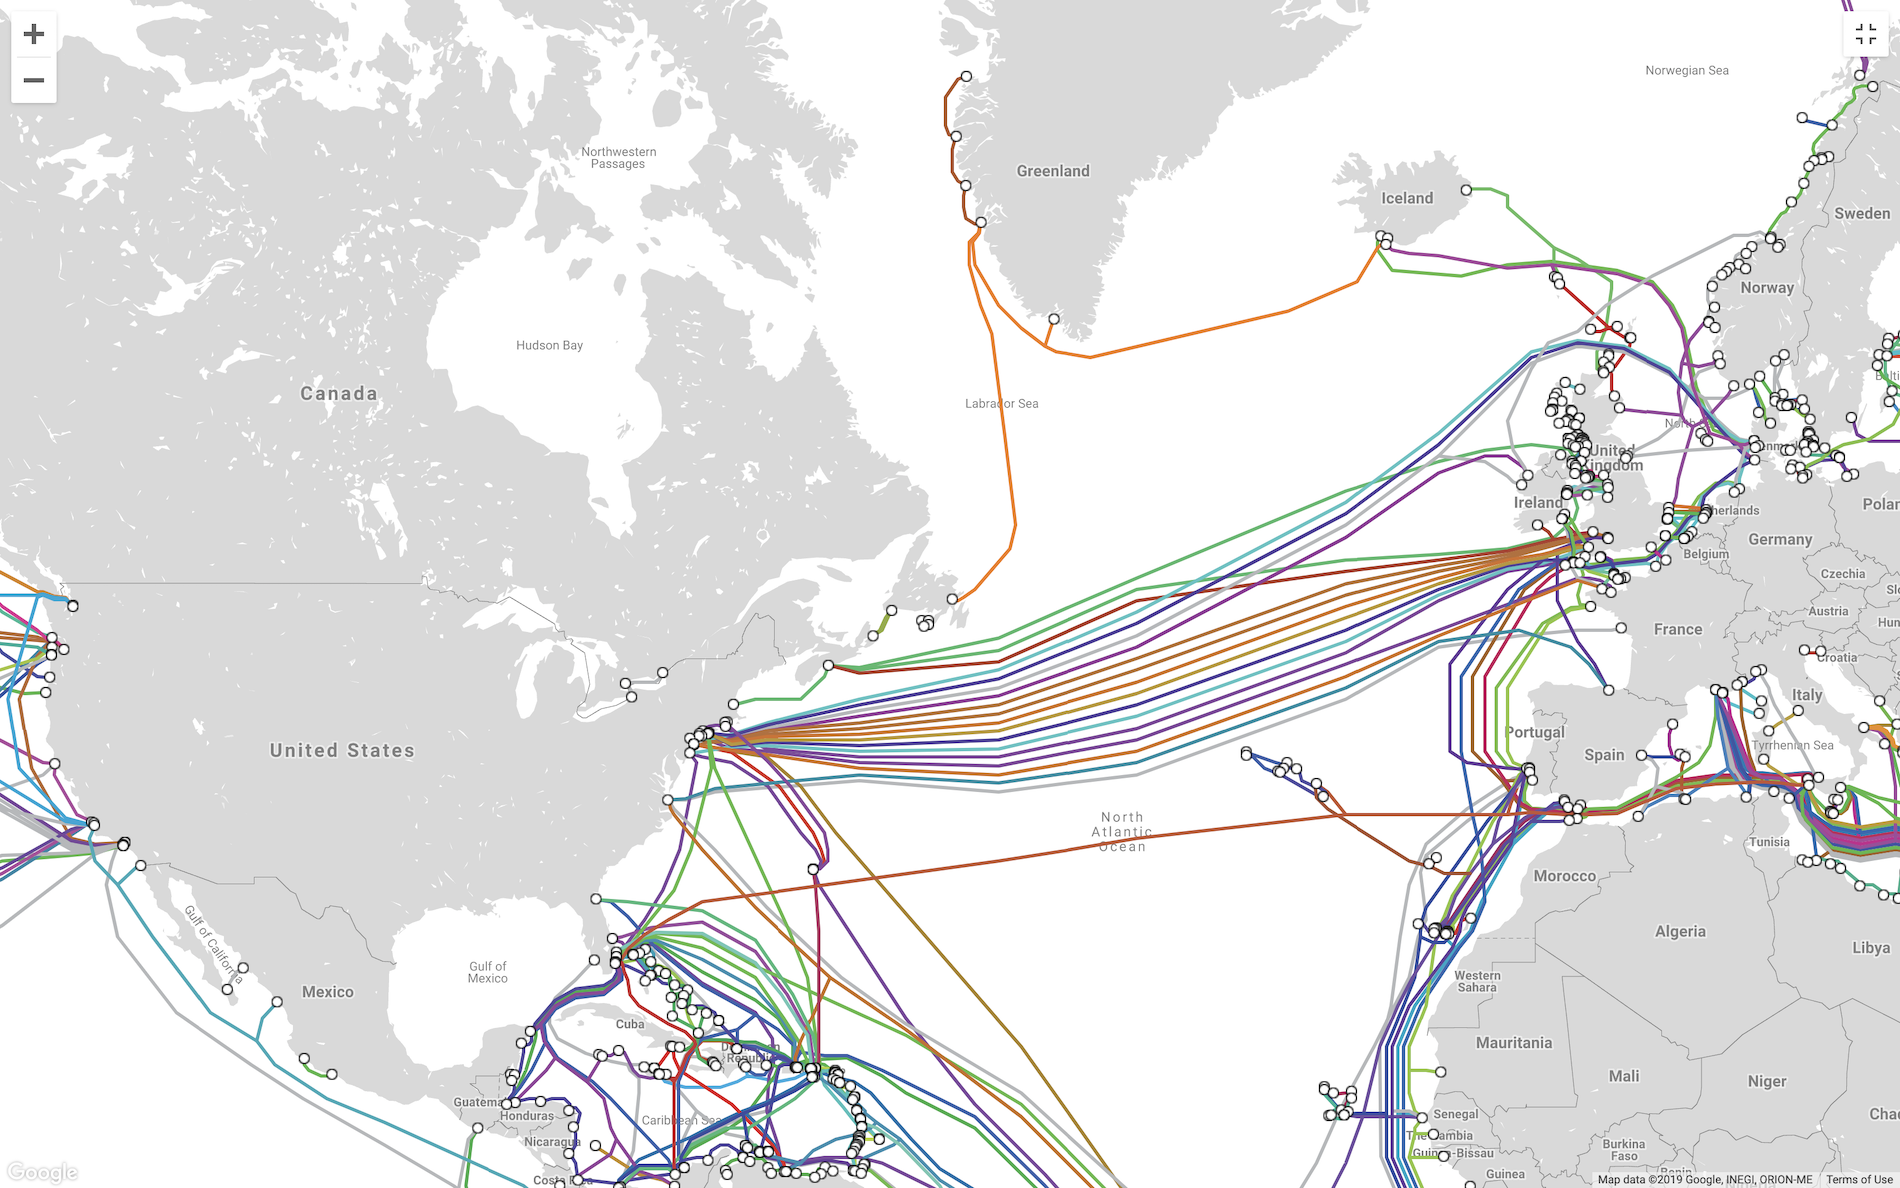 This map from TeleGeography shows undersea data cables which span the Atlantic Ocean. View interactive here.